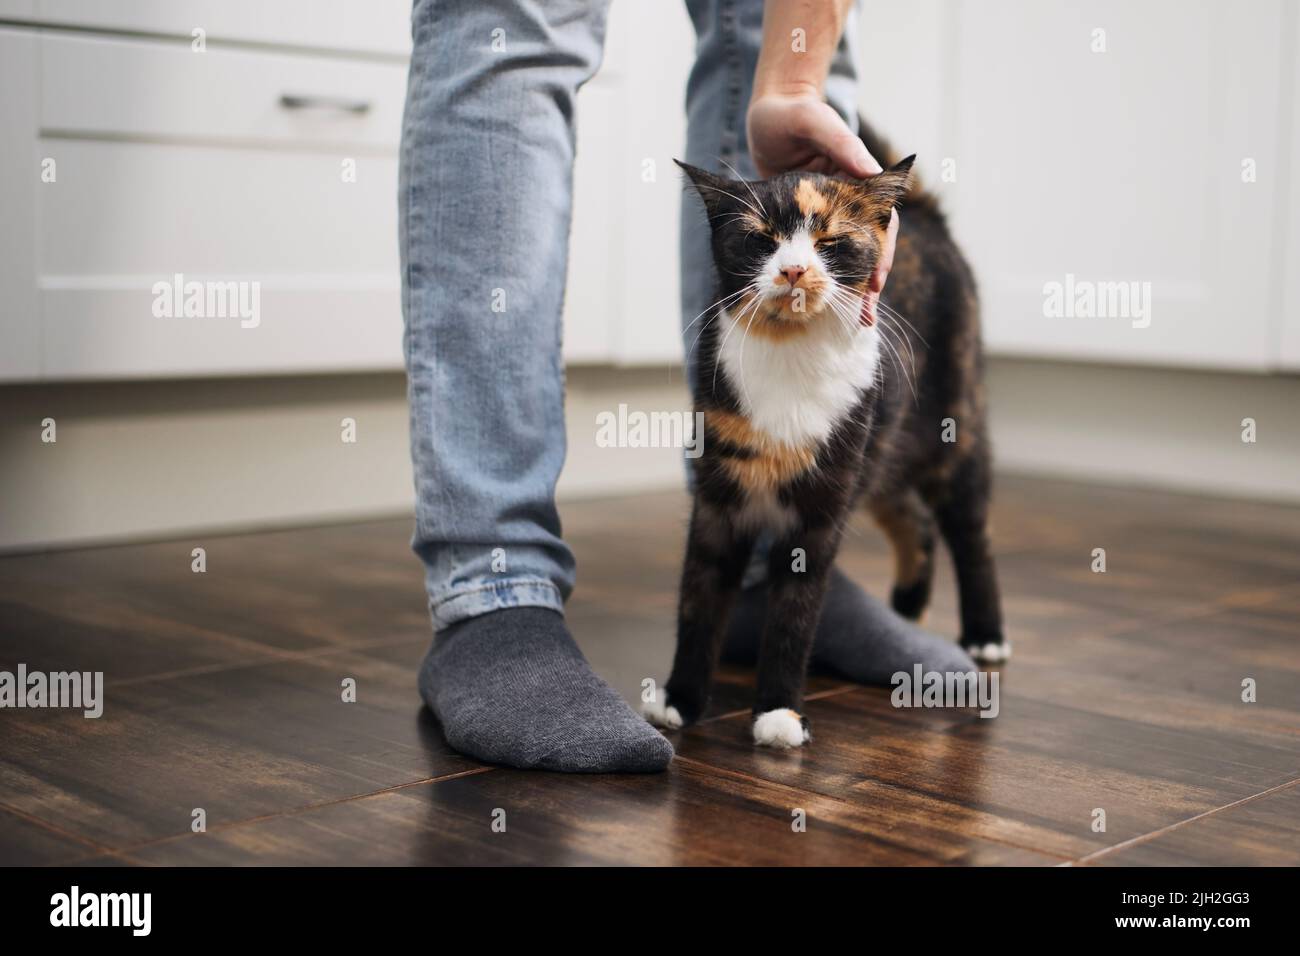 Domestic life with pet. Man stroking his cute mottled cat at home Stock Photo